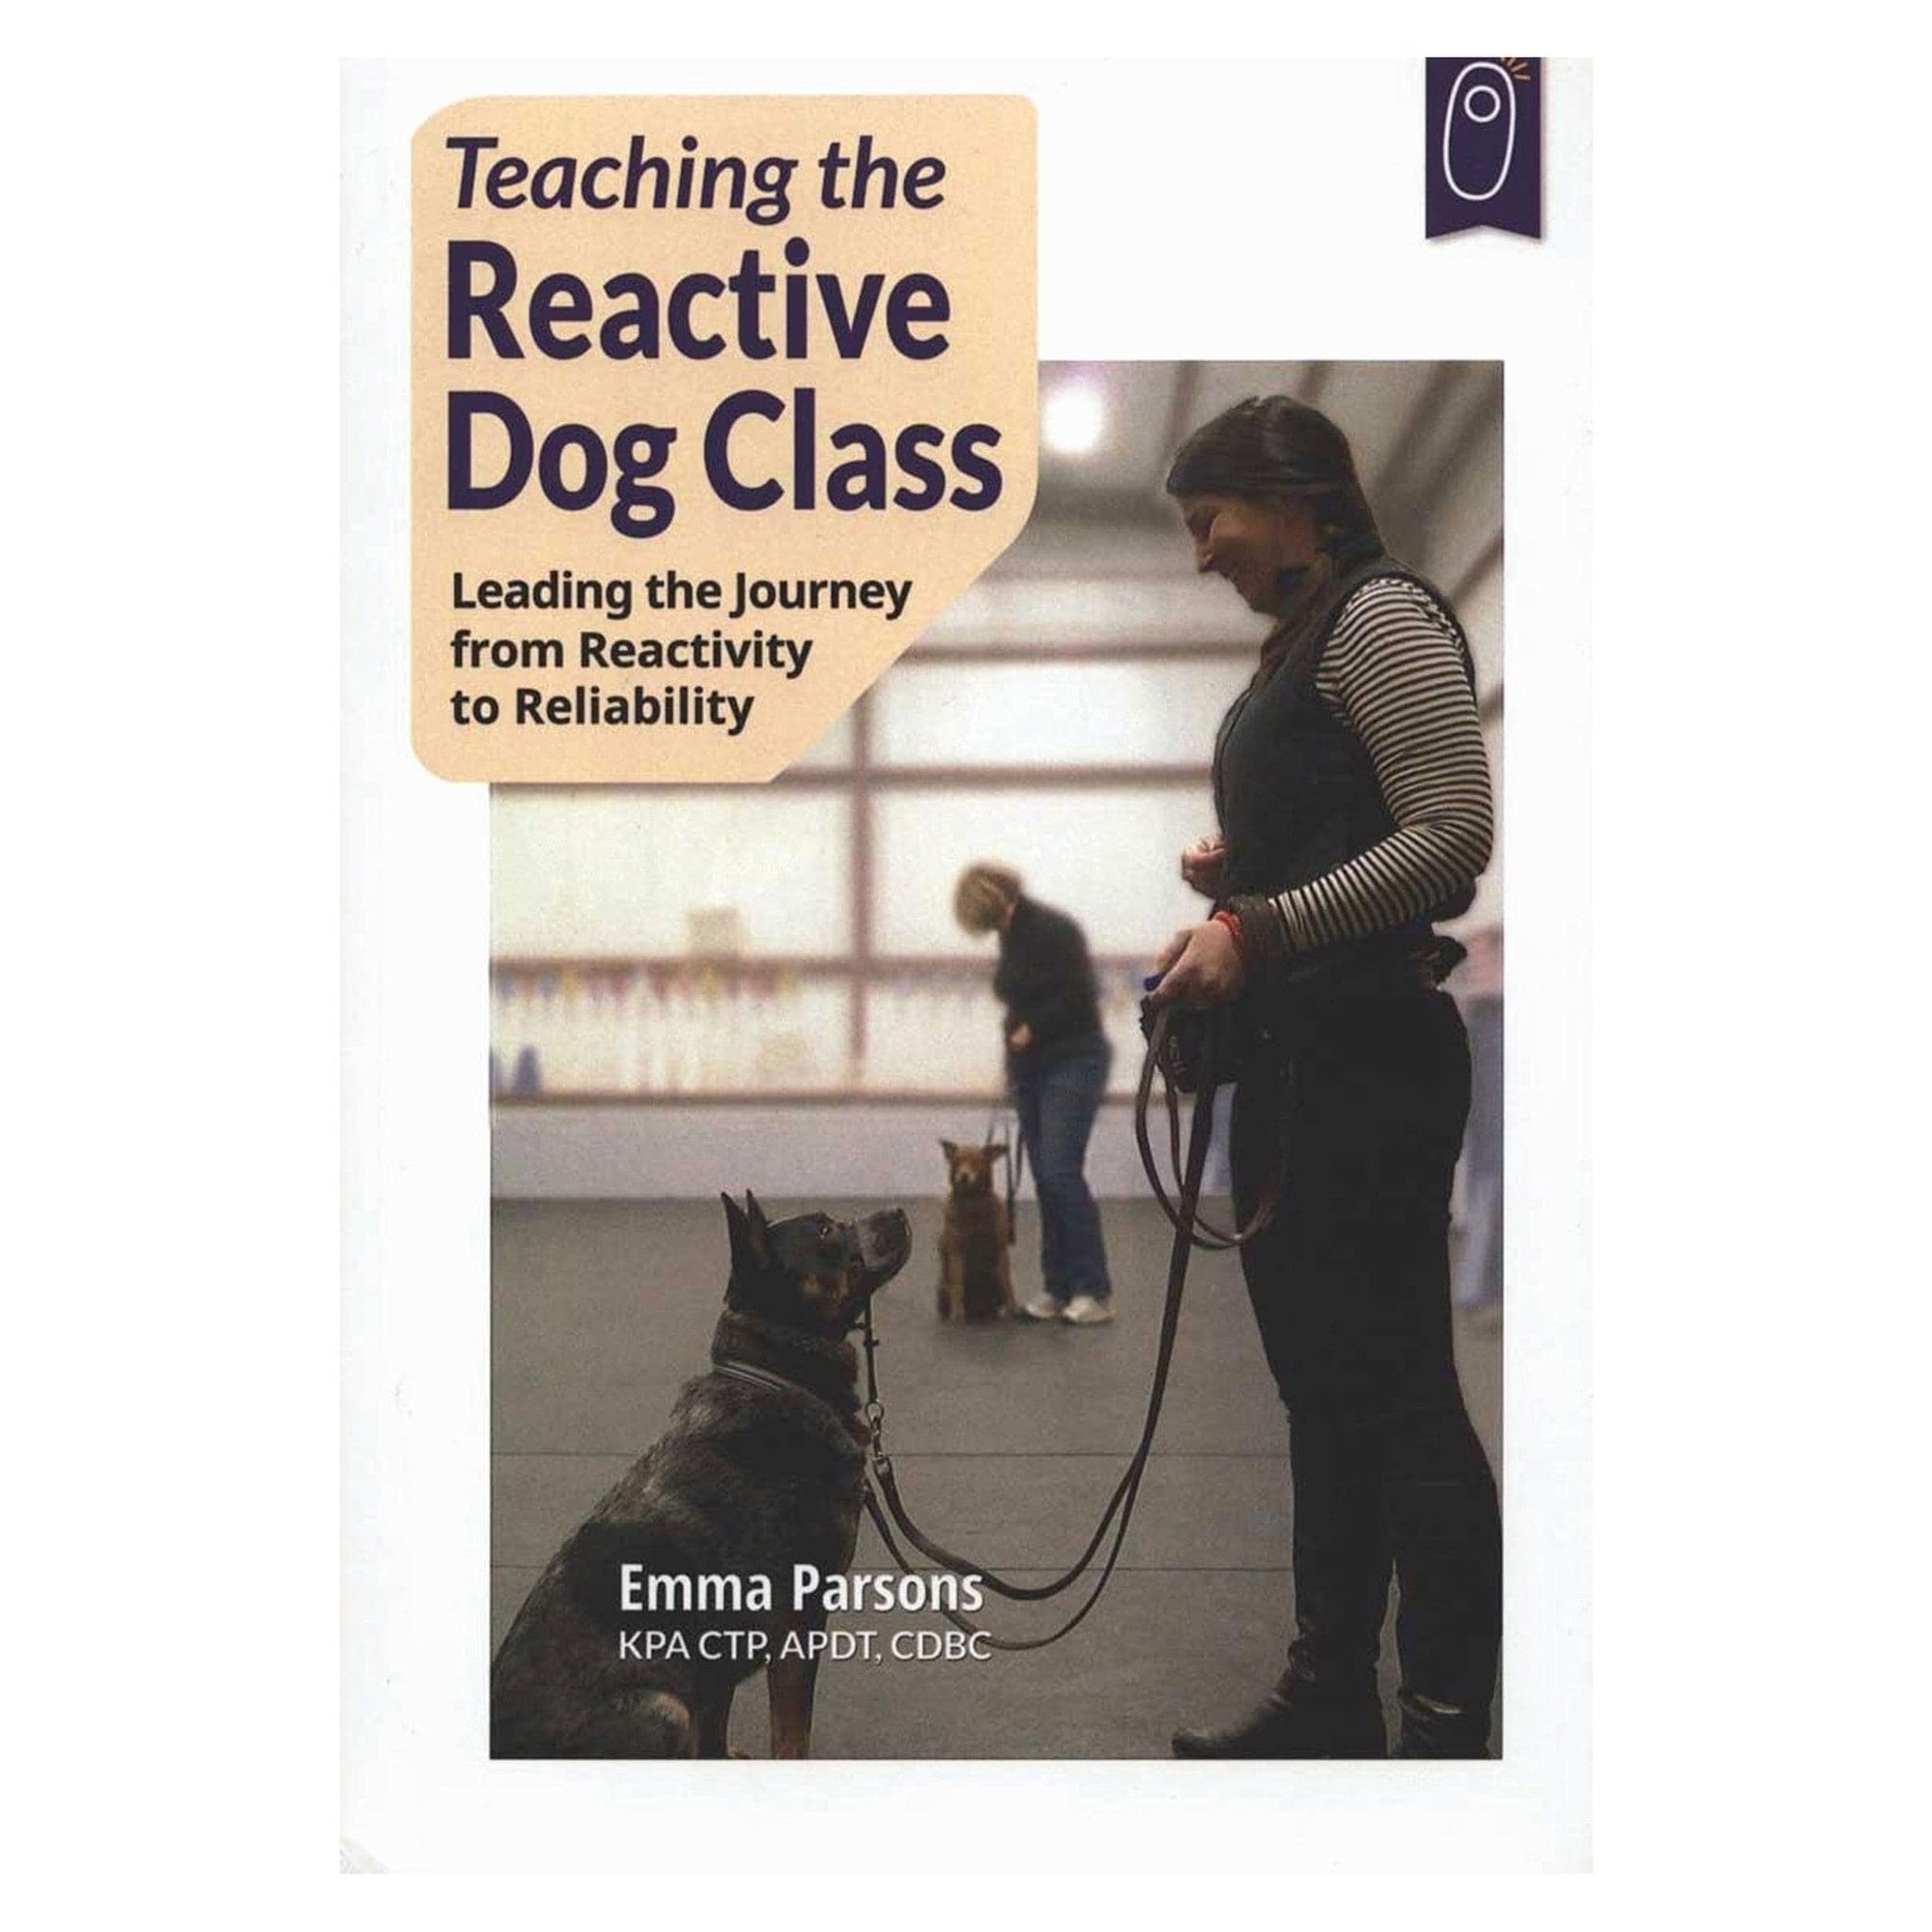 Teaching the Reactive Dog Class by Emma Parsons